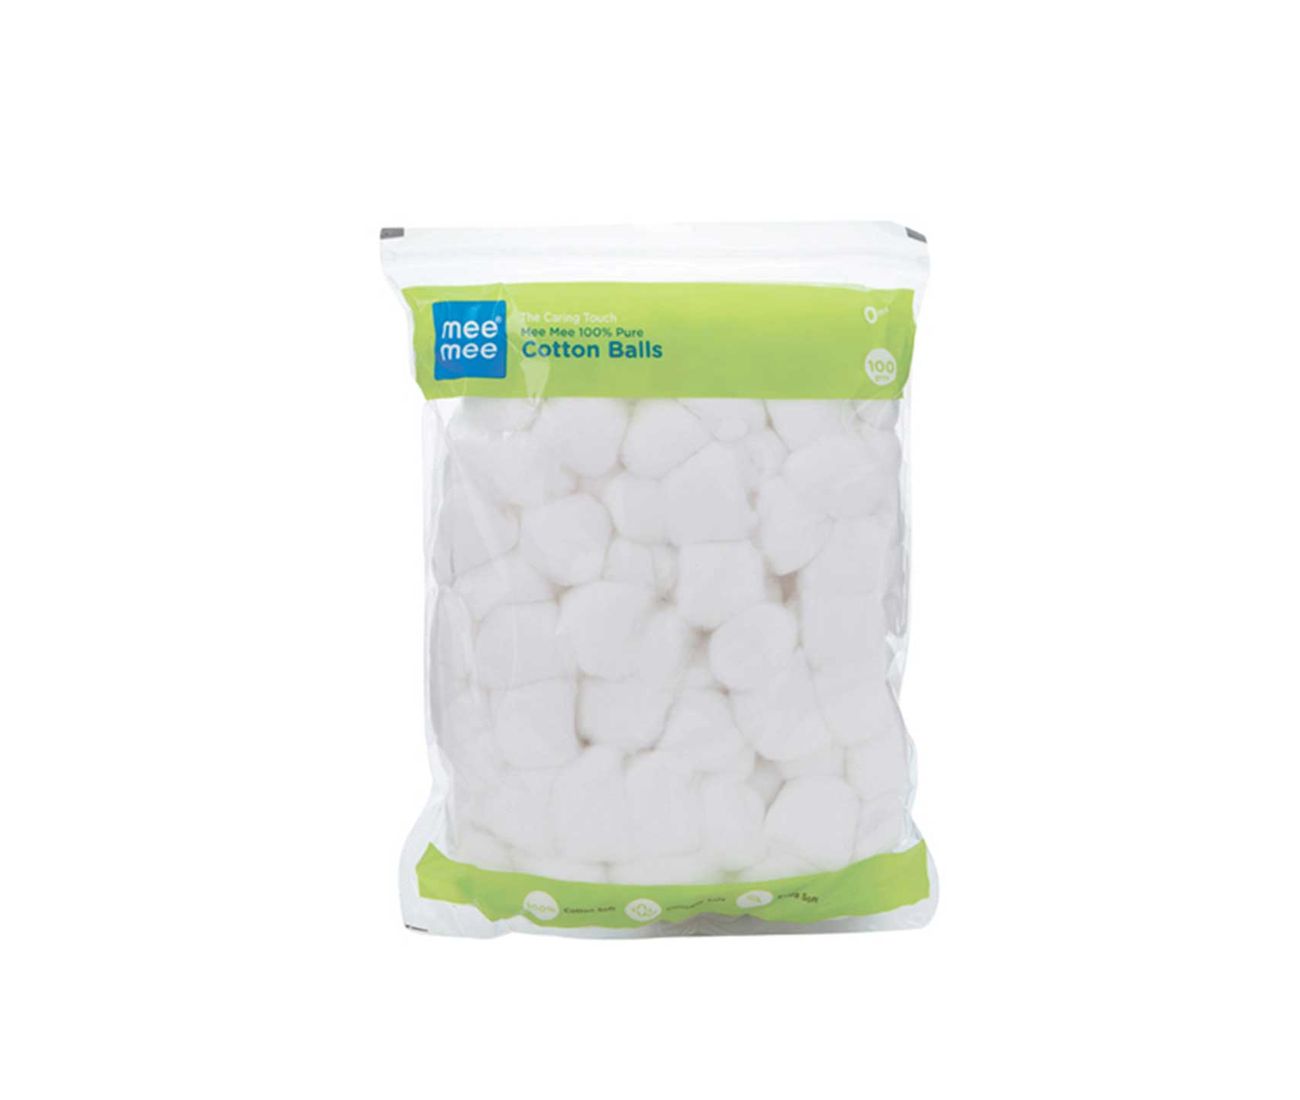 Mee Mee 100 % Pure Cotton Balls - 80 Pieces